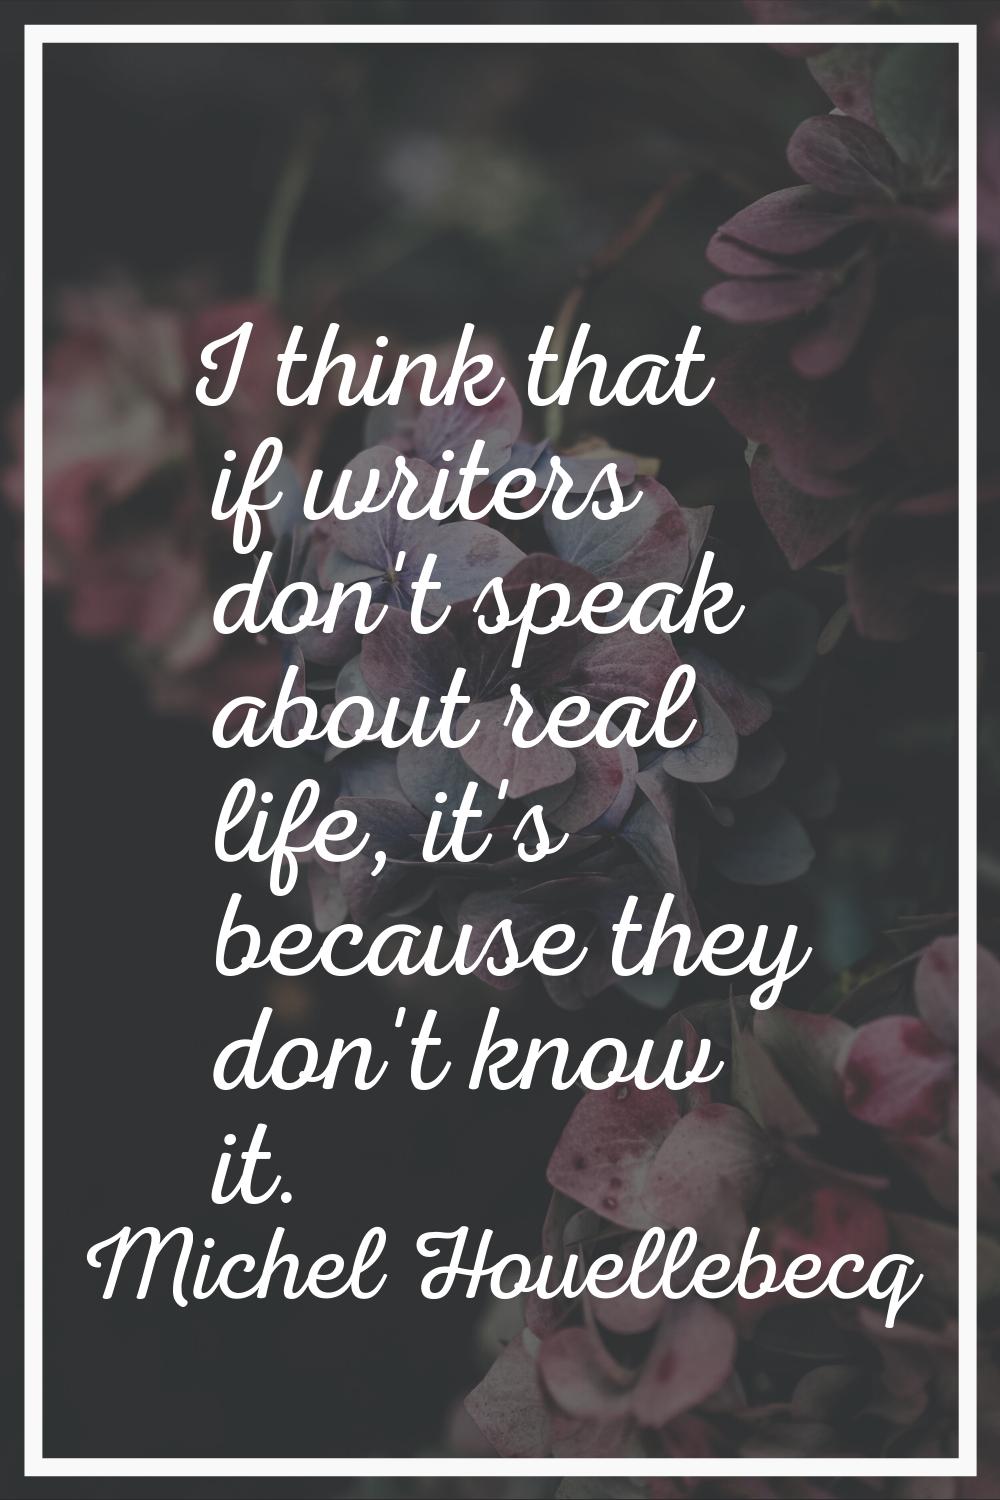 I think that if writers don't speak about real life, it's because they don't know it.